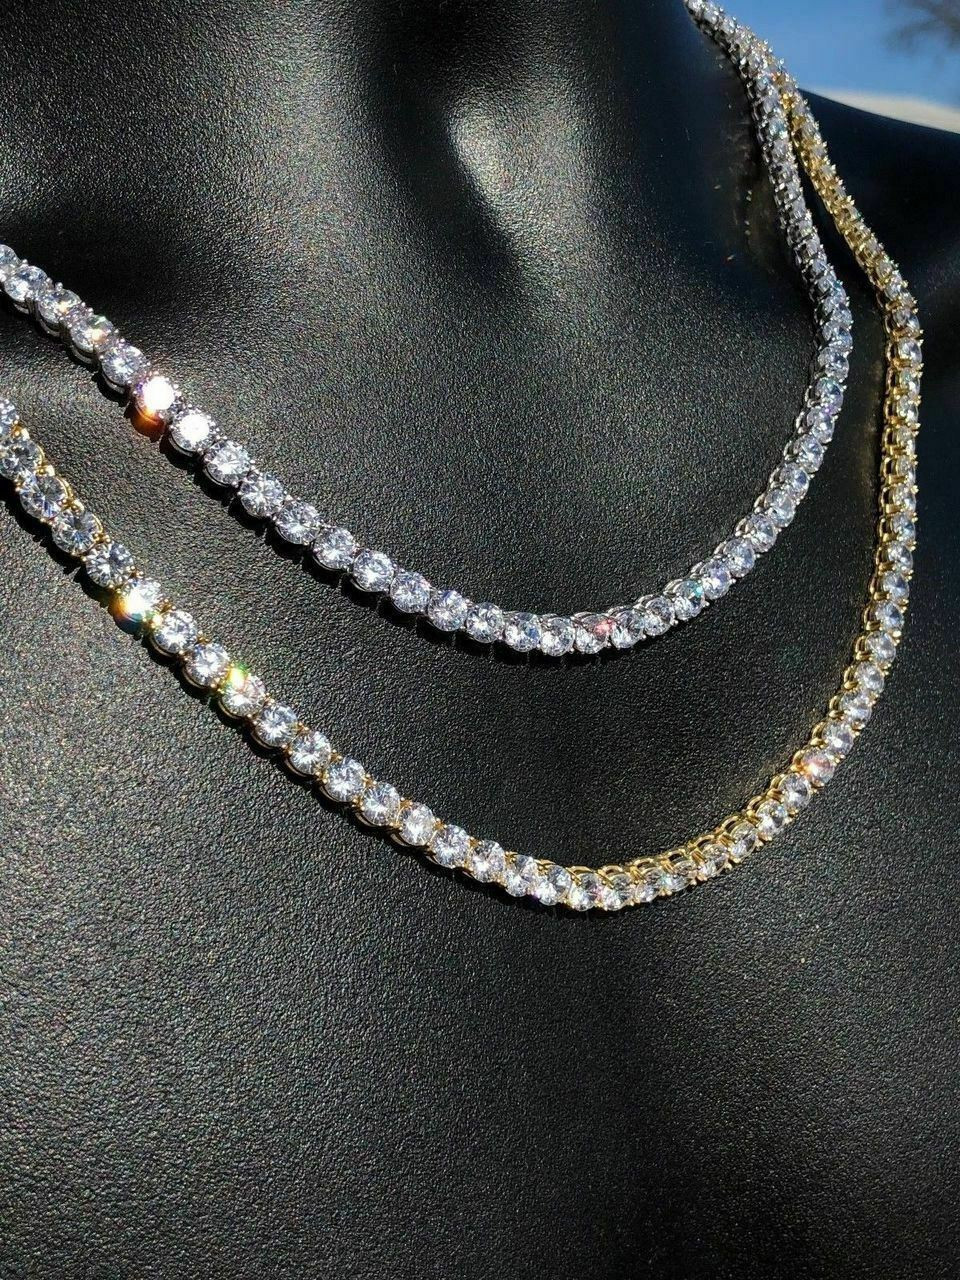 Buy 3MM Iced Out Diamond Tennis Chain Men's Jewelry Diamond Necklace Hip  Hop Tennis Chain Hip Hop Necklace 14k White Gold Online in India - Etsy